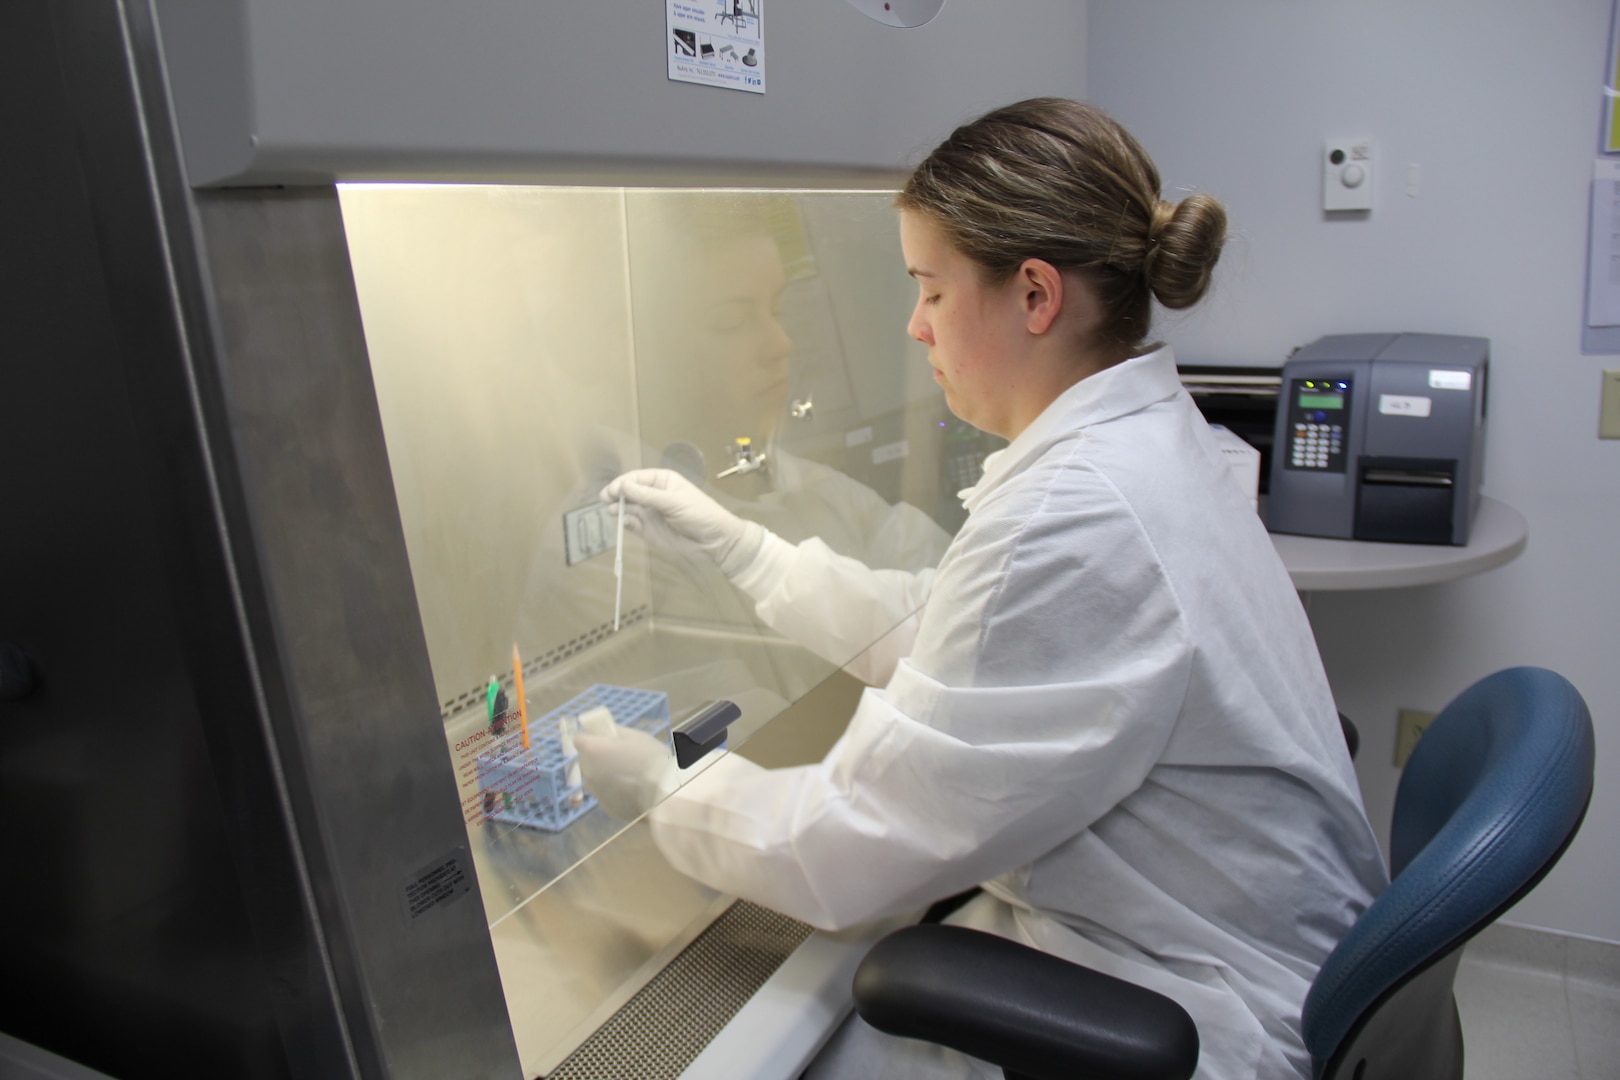 Spc. Gabrielle Gavlick, a microbiology specialist at Bassett Army Community Hospital prepares a sample for COVID-19 rapid testing though a biological safety cabinet. Bassett ACH became the first healthcare facility in interior Alaska to have the capabilities to perform COVID-19 testing.